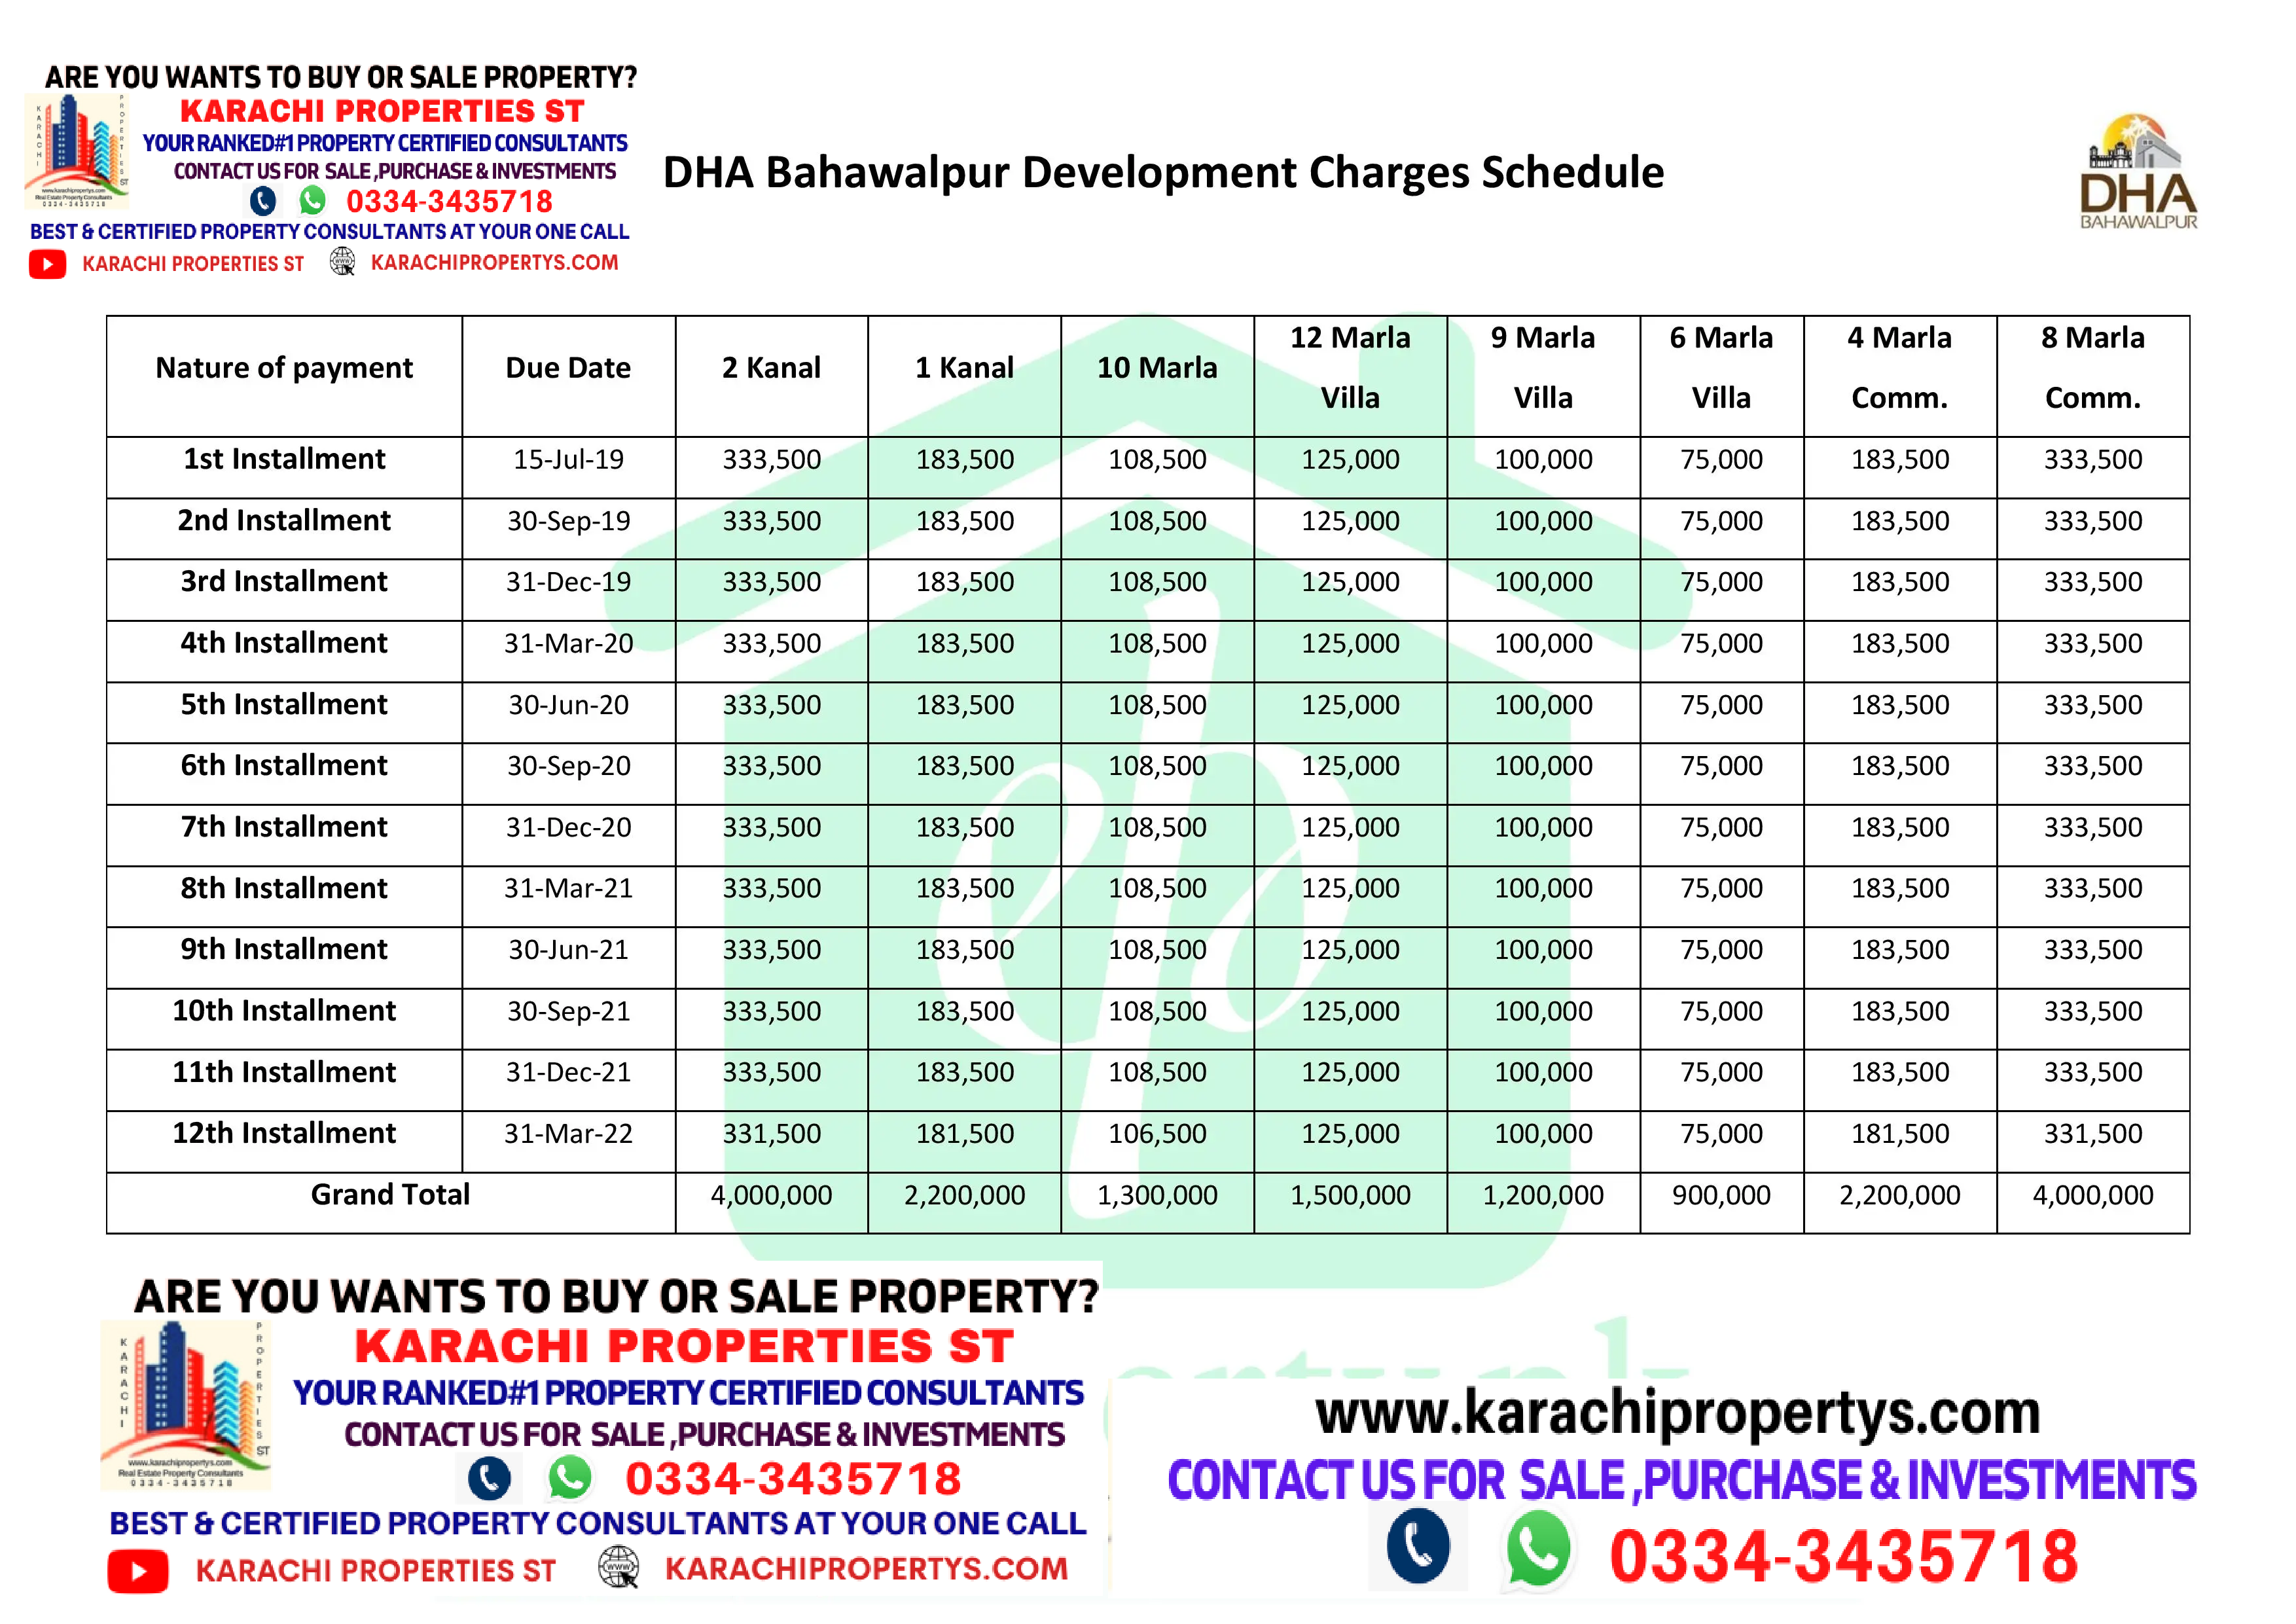 DHA BAHAWALPUR DEVELOPMENT CHARGES SCHEDULE NEW LATEST